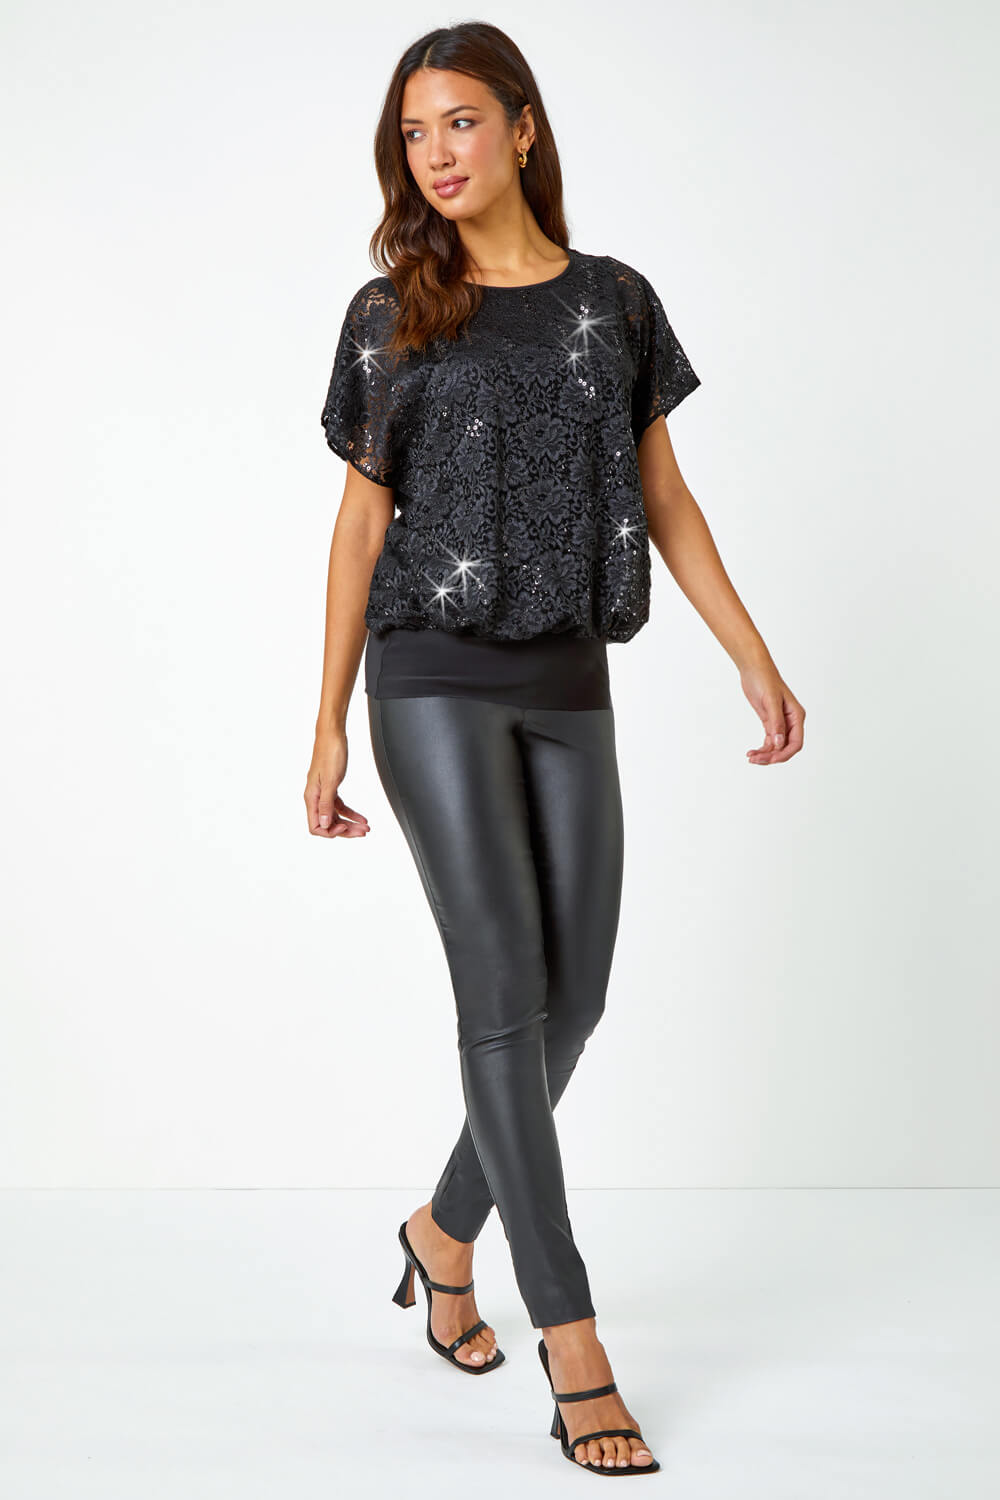 Black Sequin Lace Stretch Overlay Top | Roman UK